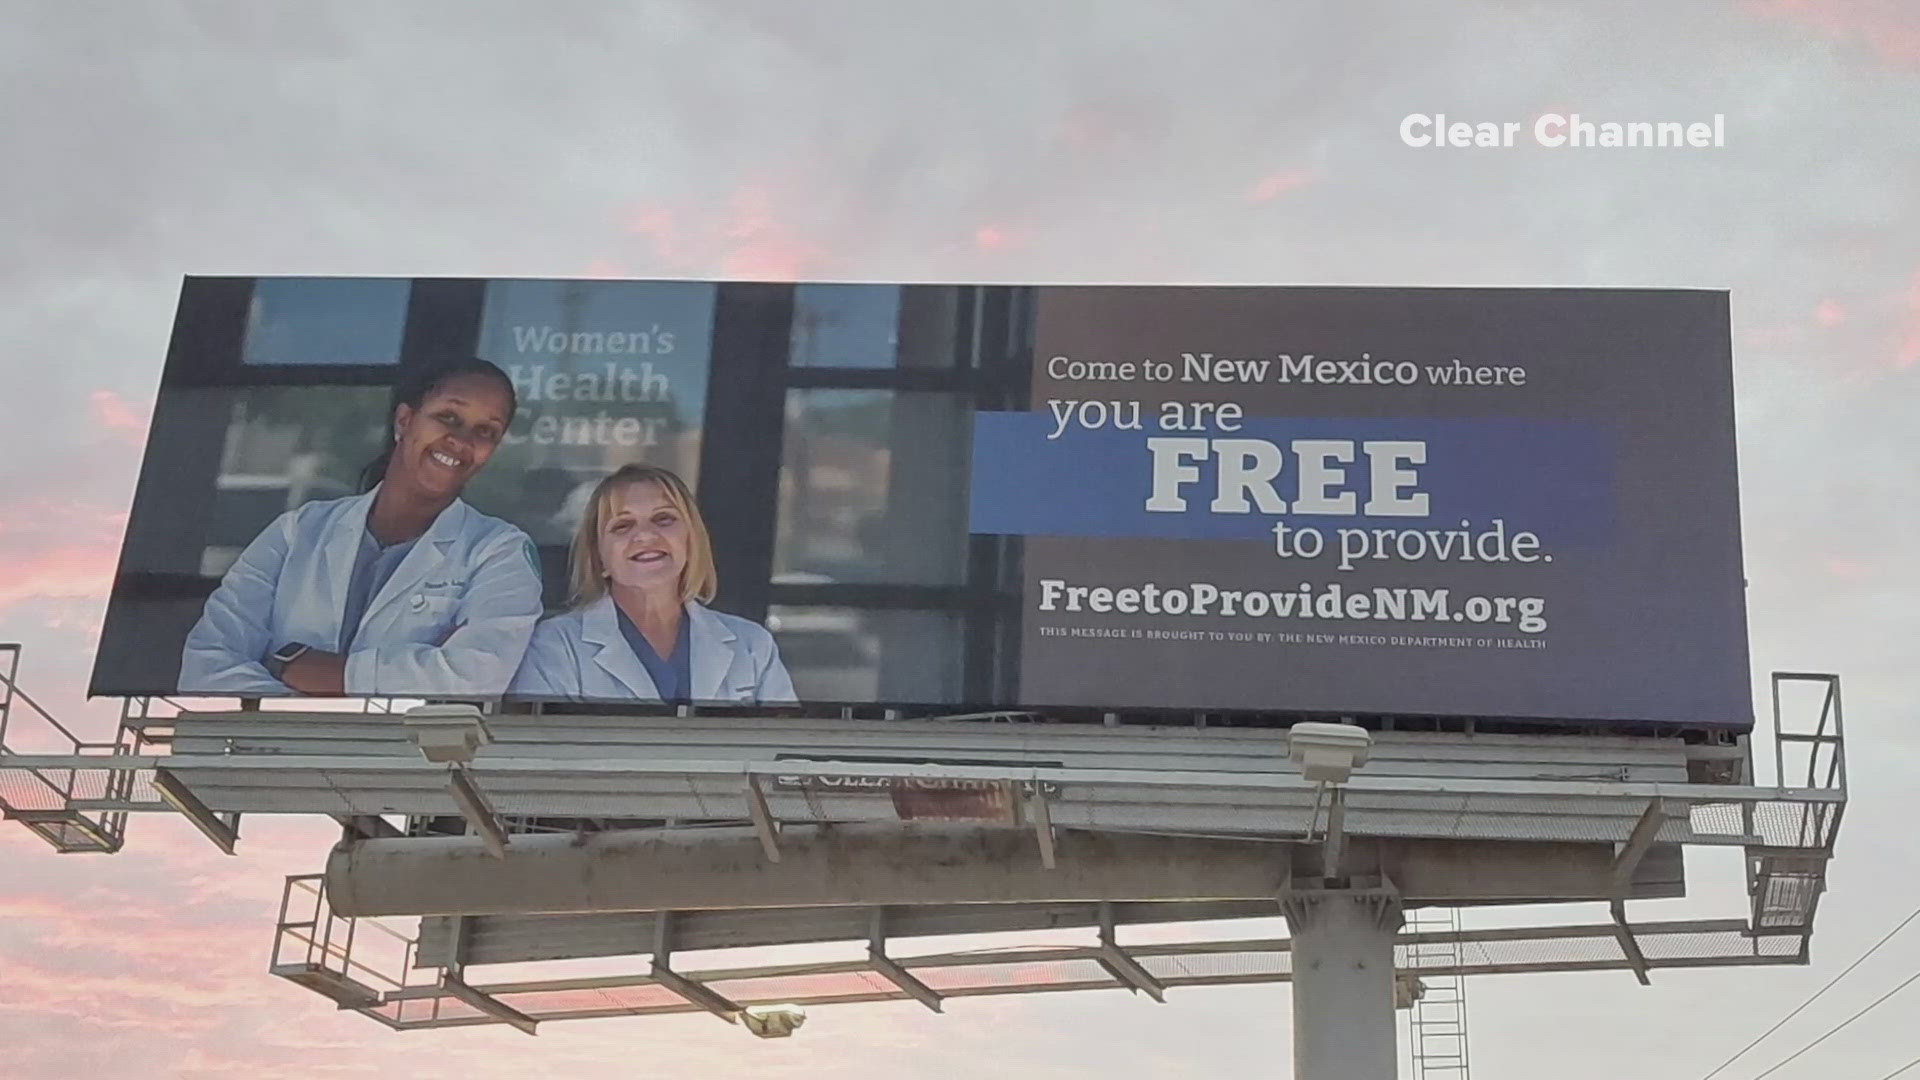 The campaign, which includes billboards and ads in major newspapers, aims to attract doctors to New Mexico.